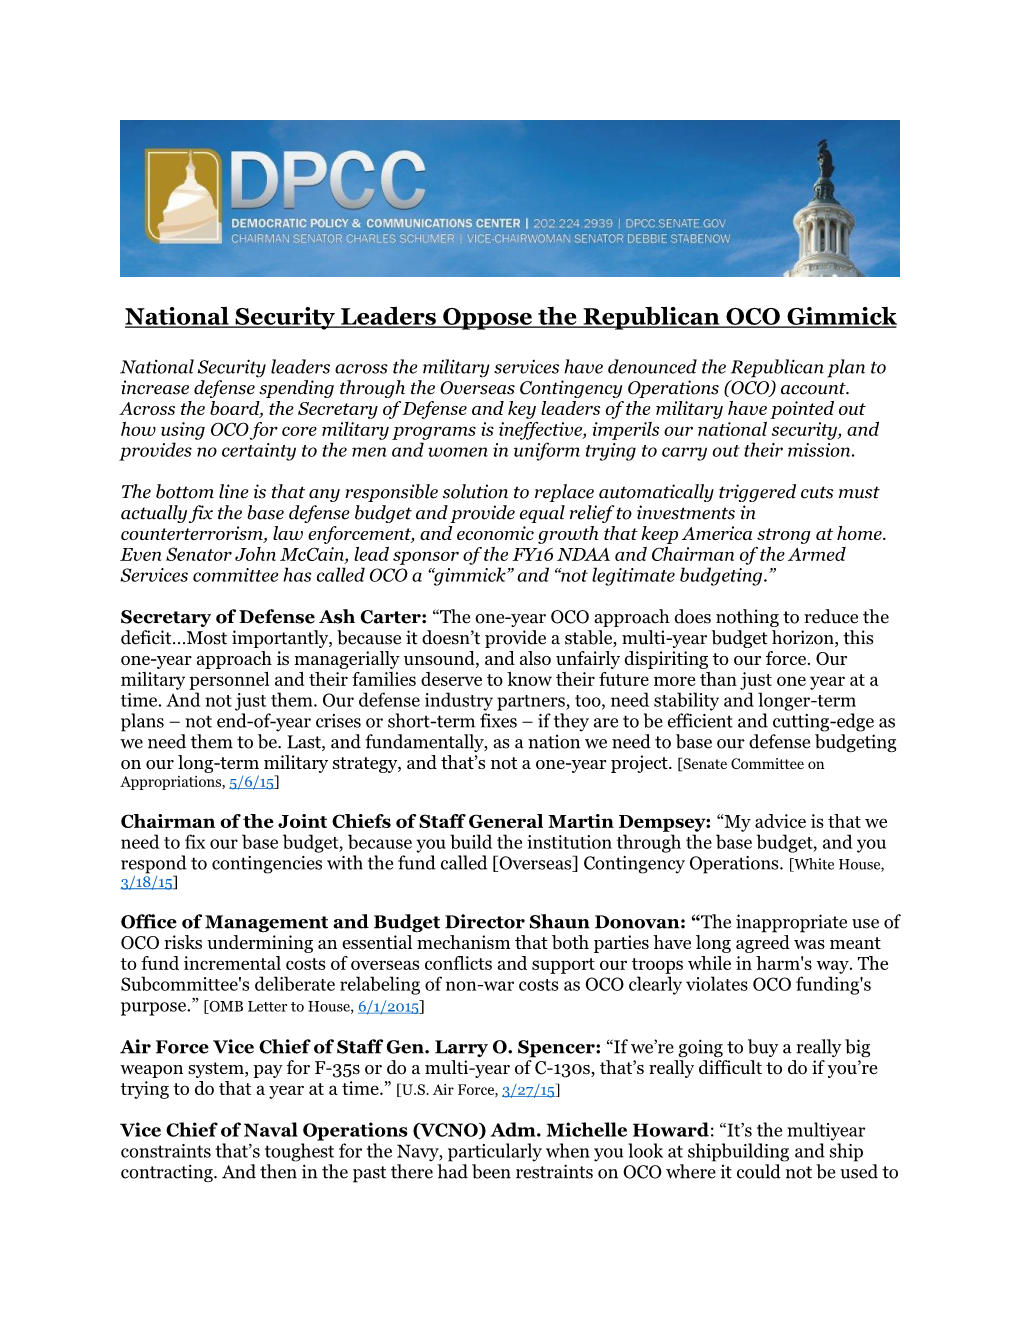 National Security Leaders Oppose the Republican OCO Gimmick